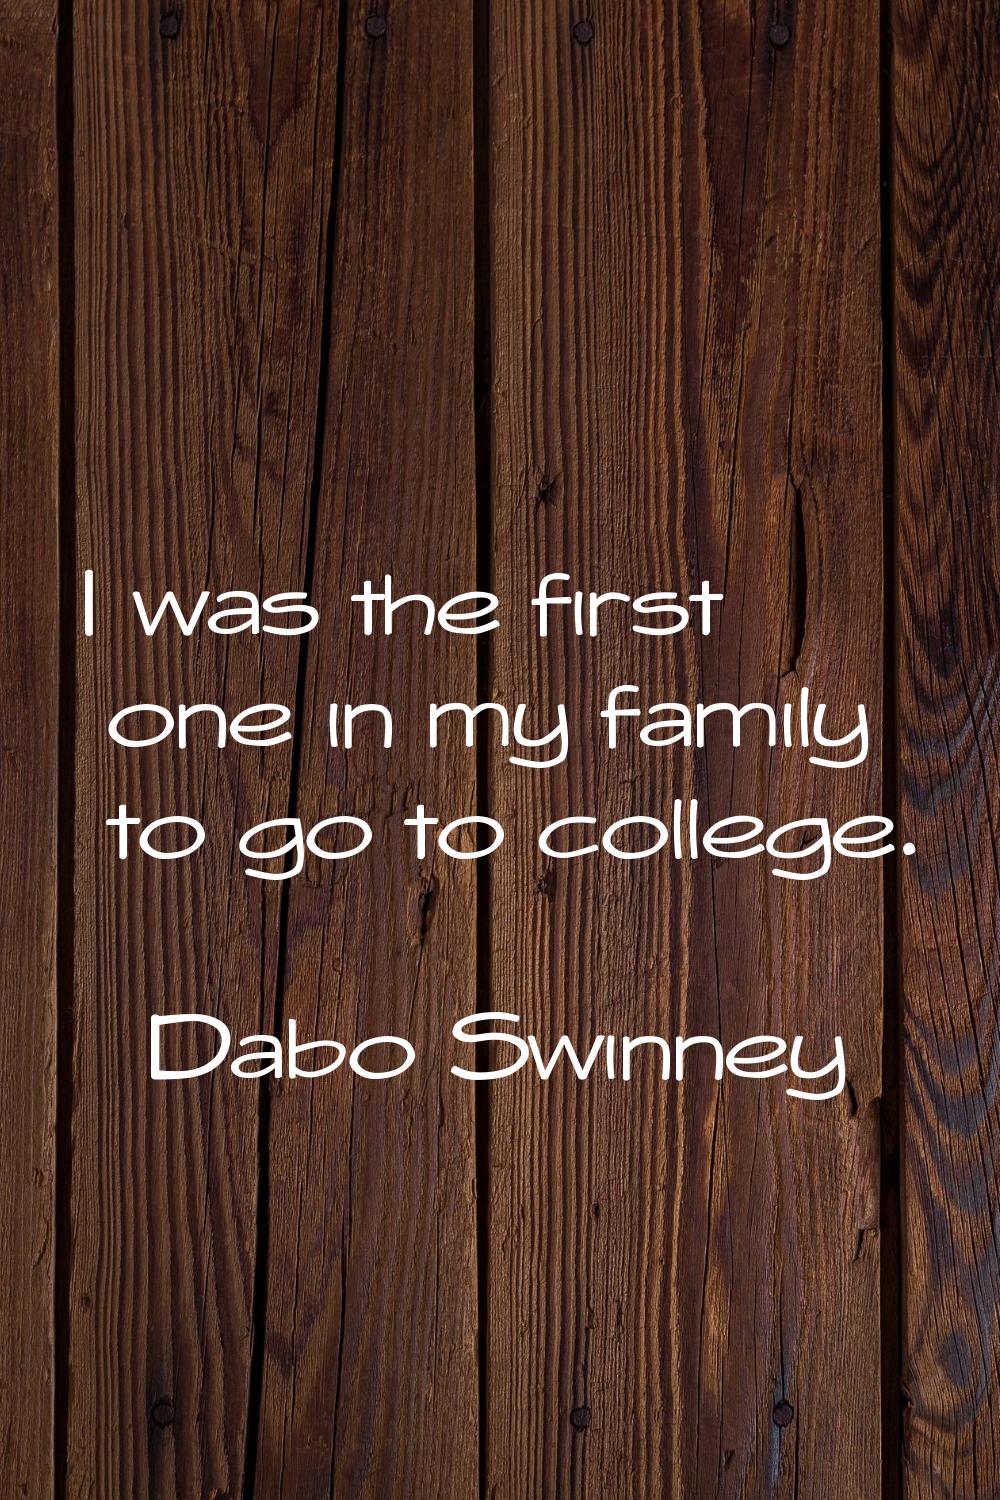 I was the first one in my family to go to college.